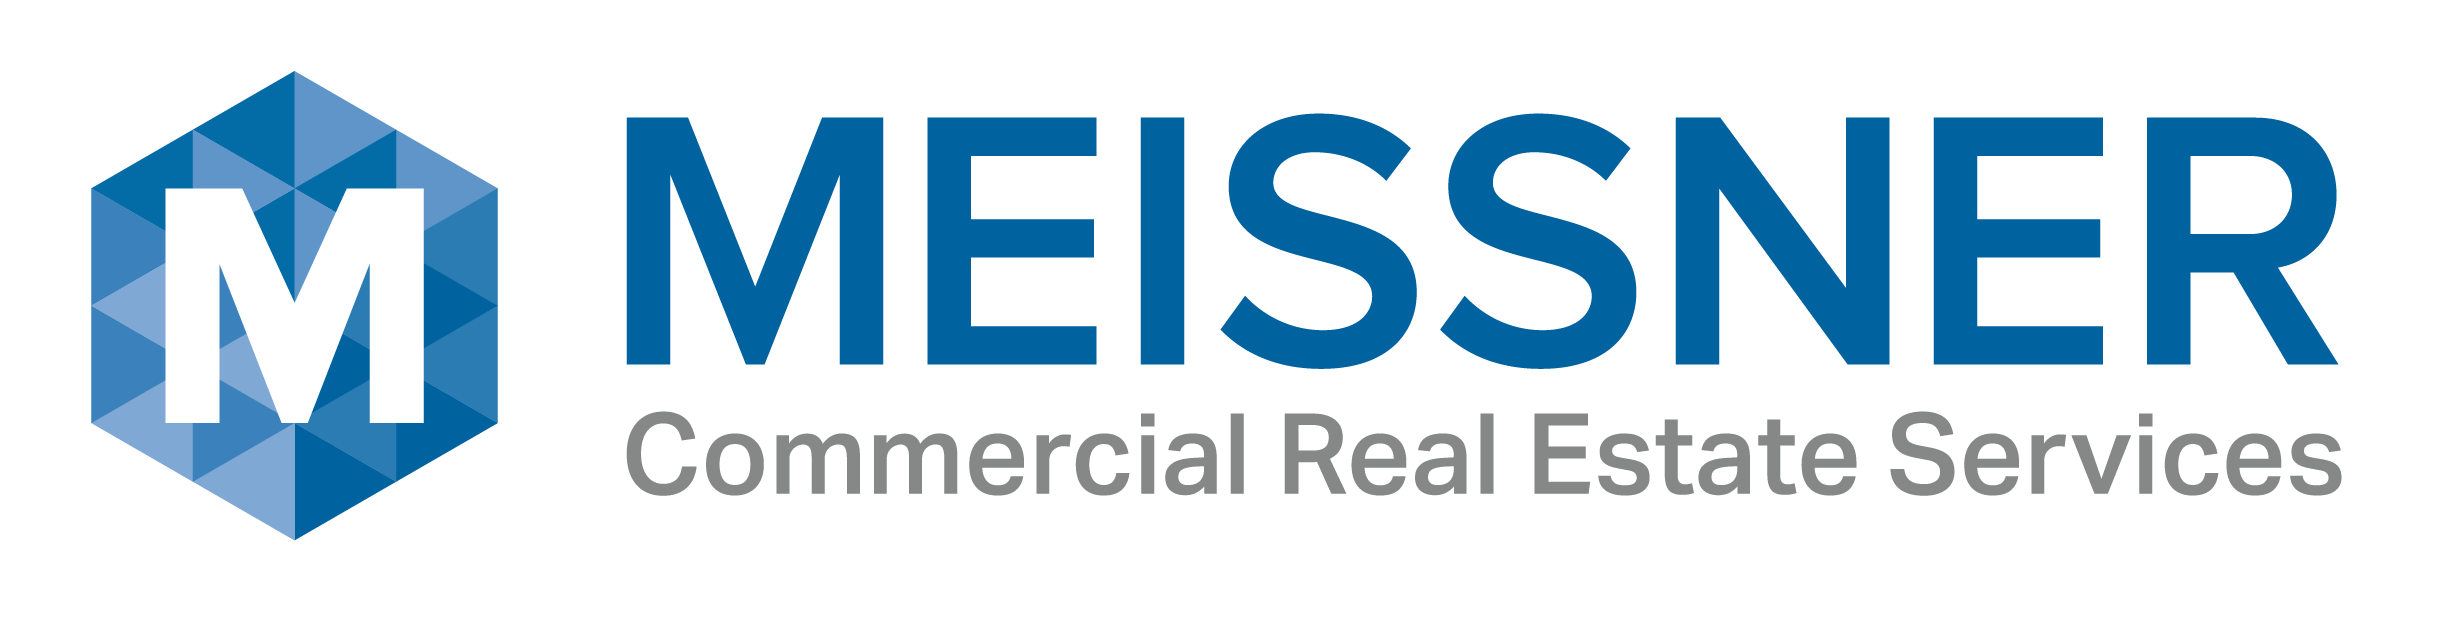 Meissner Commercial Real Estate Services